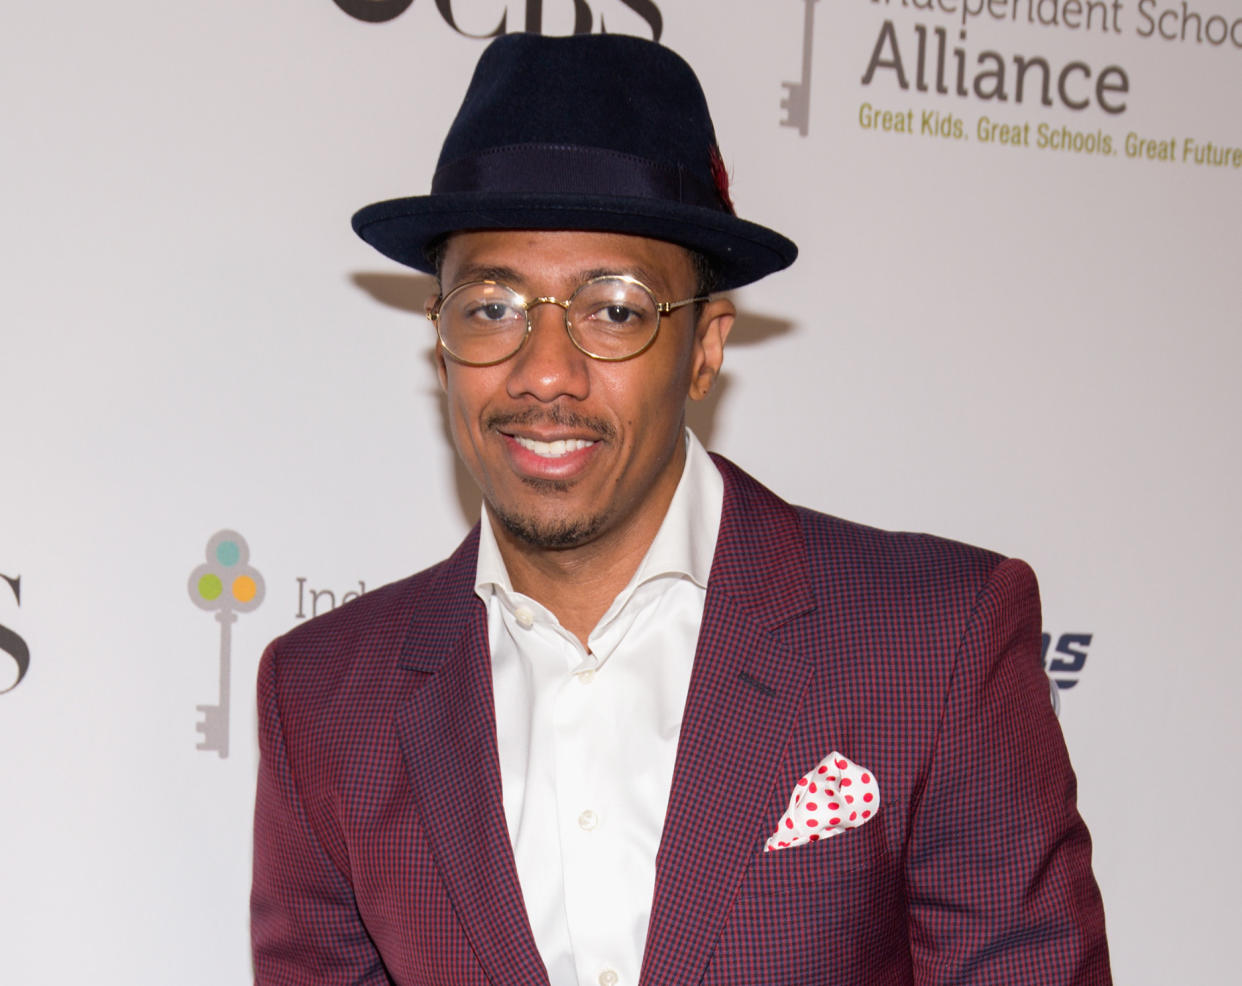 This is why Nick Cannon got replaced to host “America’s Got Talent”